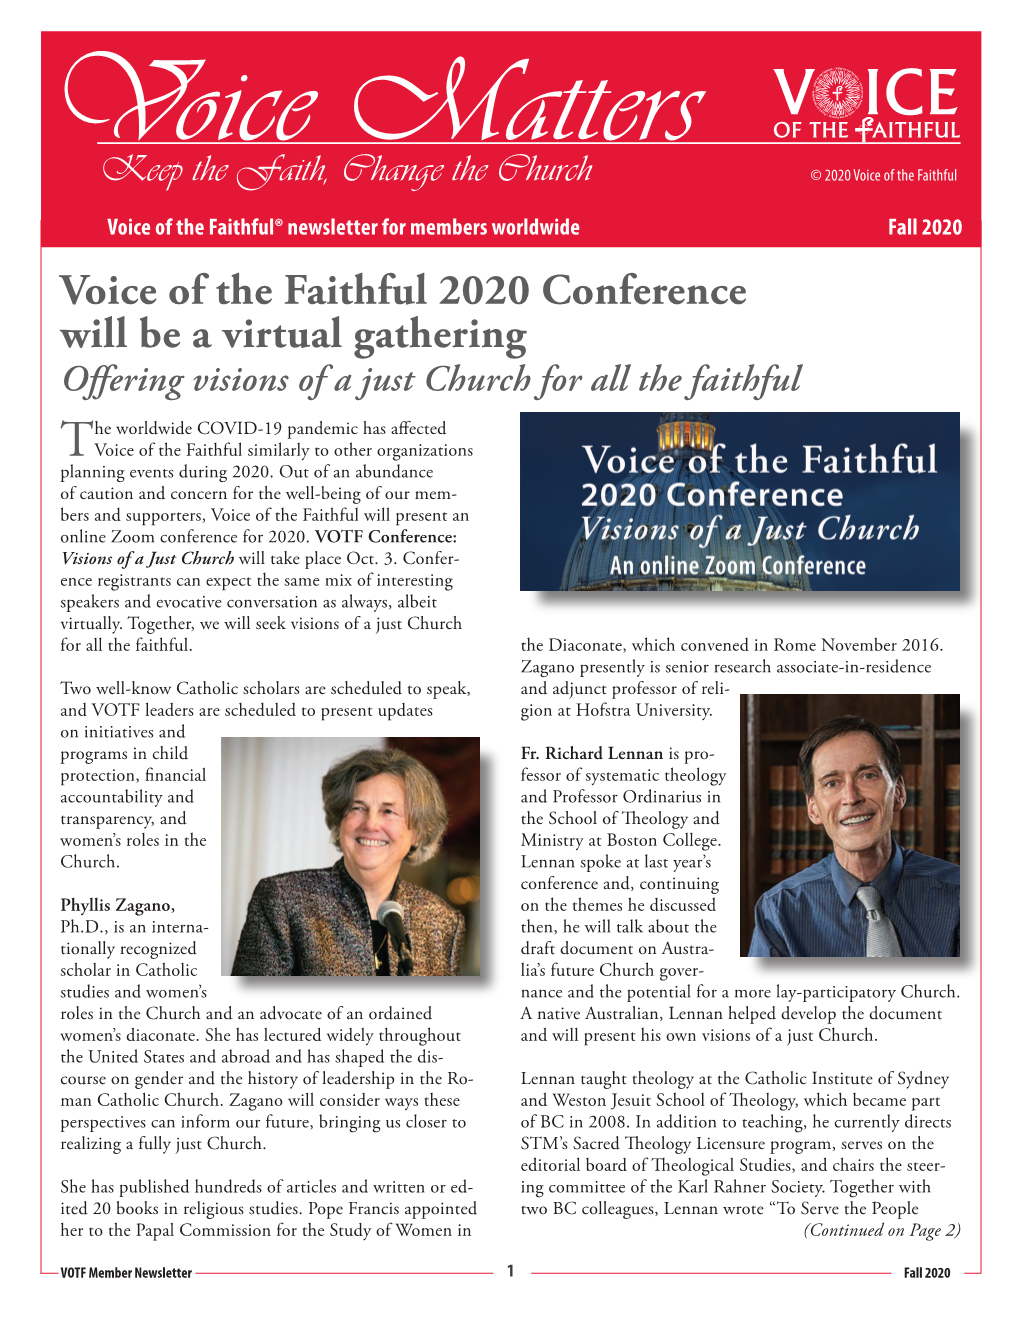 Fall 2020 Voice of the Faithful 2020 Conference Will Be a Virtual Gathering Offering Visions of a Just Church for All the Faithful